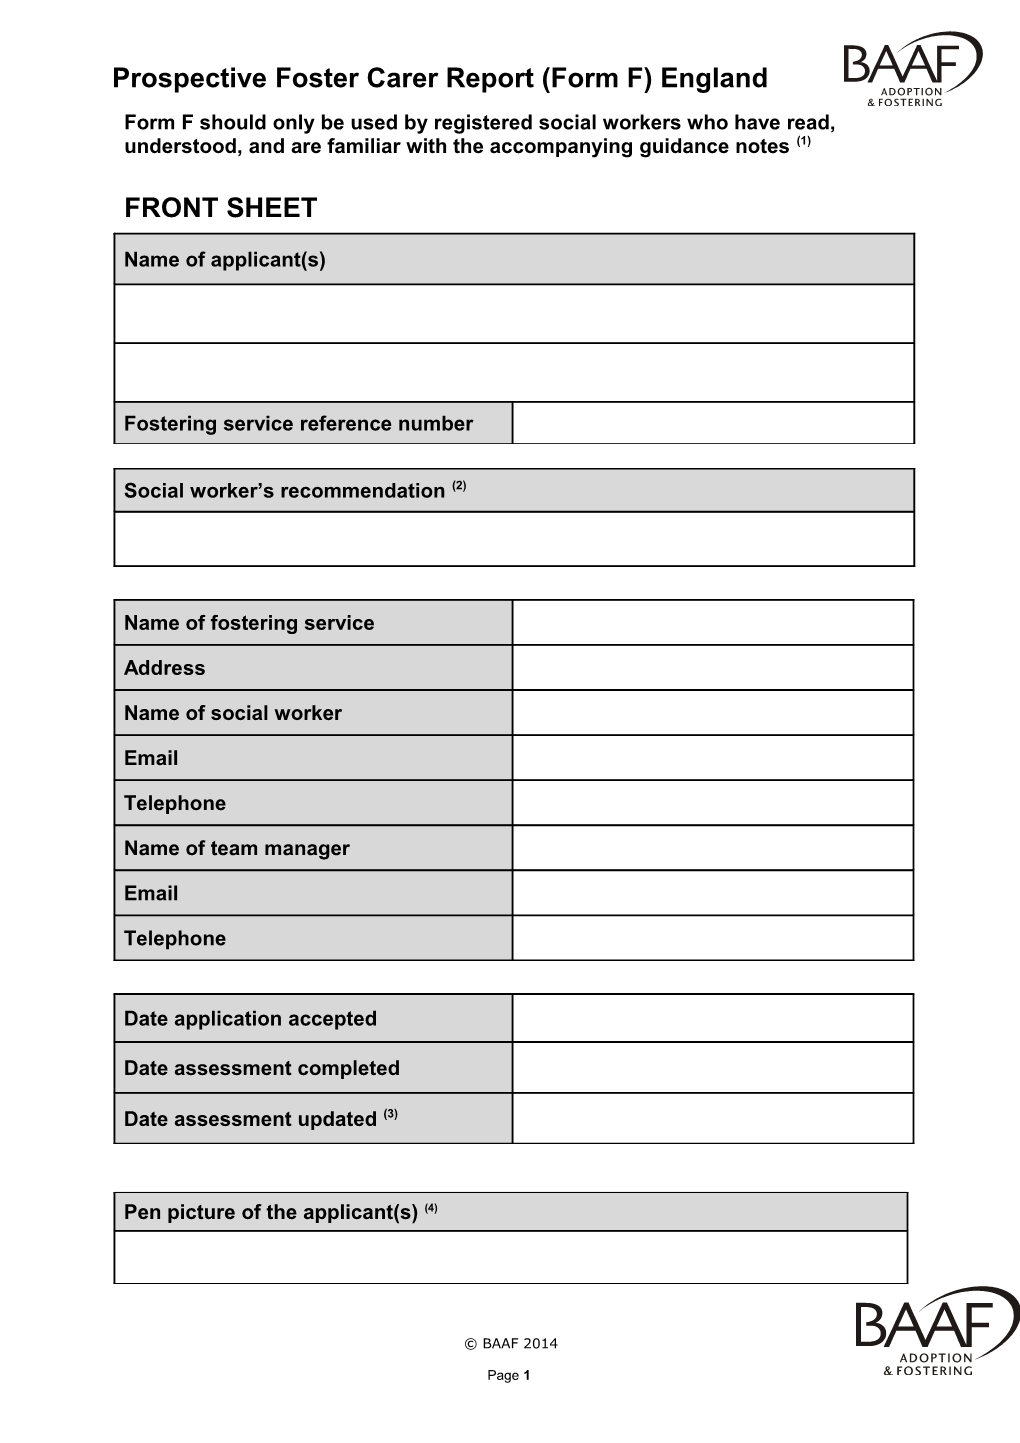 Form F Should Only Be Used by Registered Social Workers Who Have Read, Understood, And